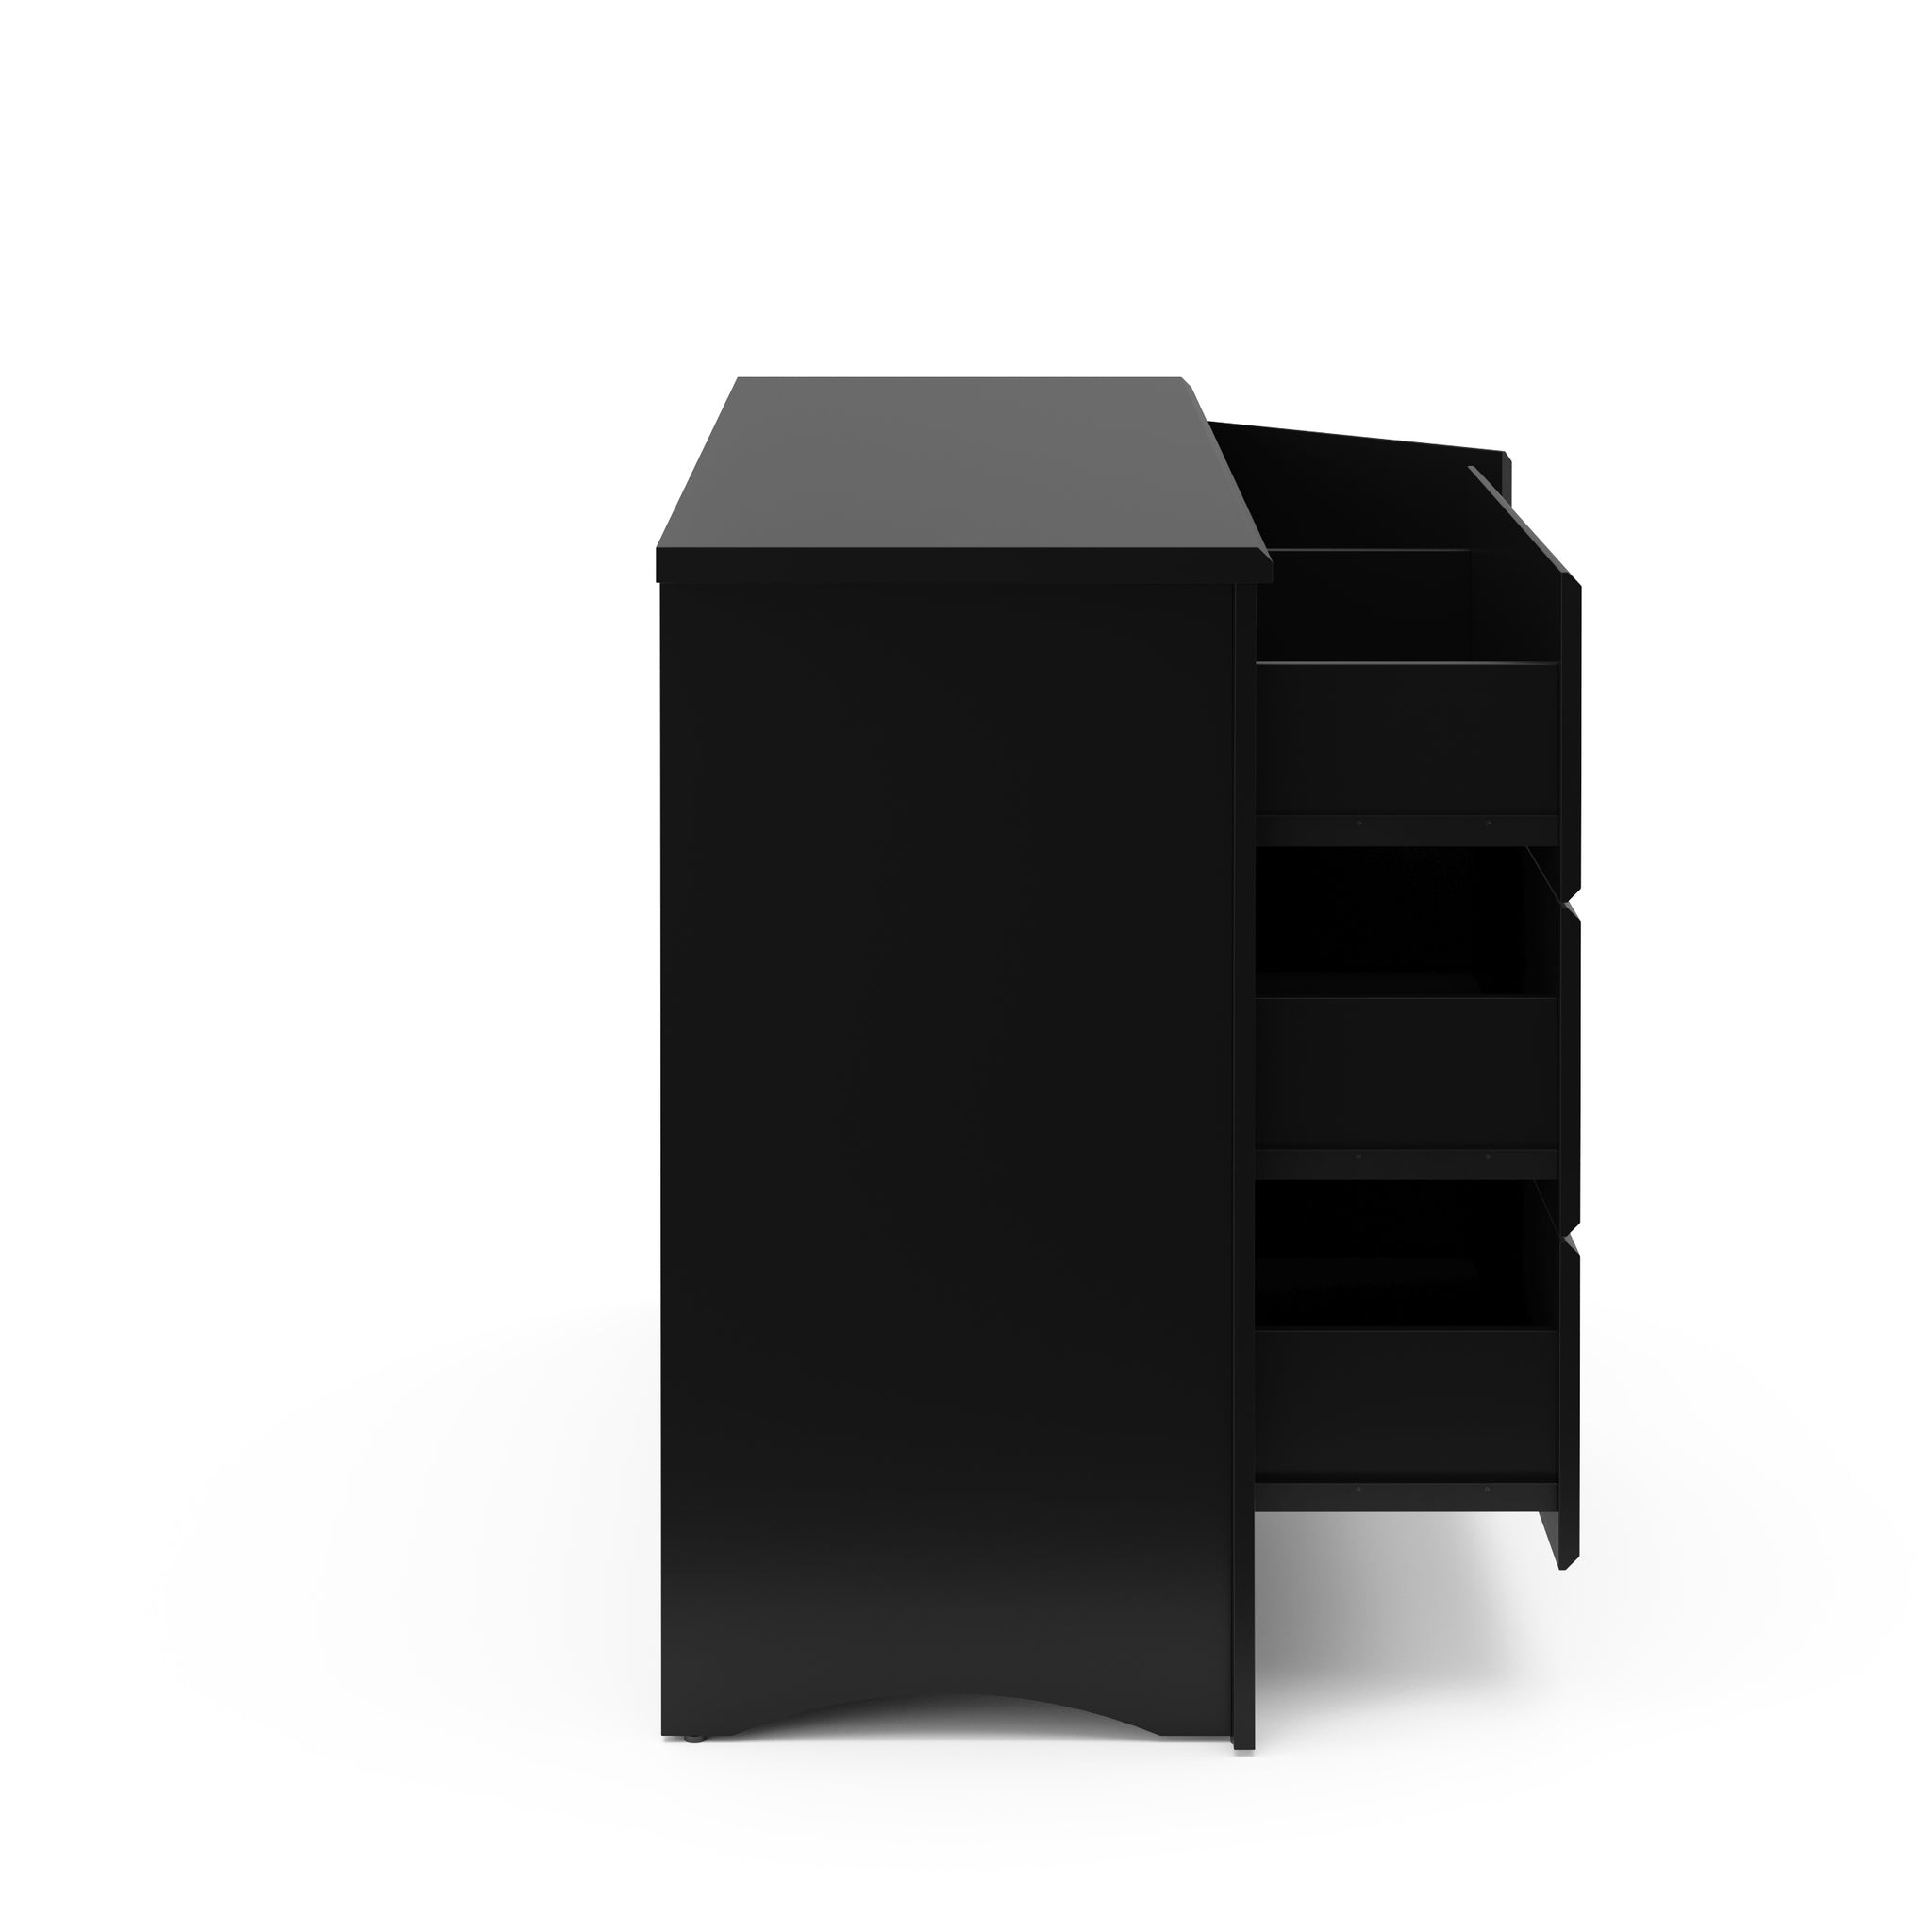 Side view of black 3 drawer chest with 3 open drawers